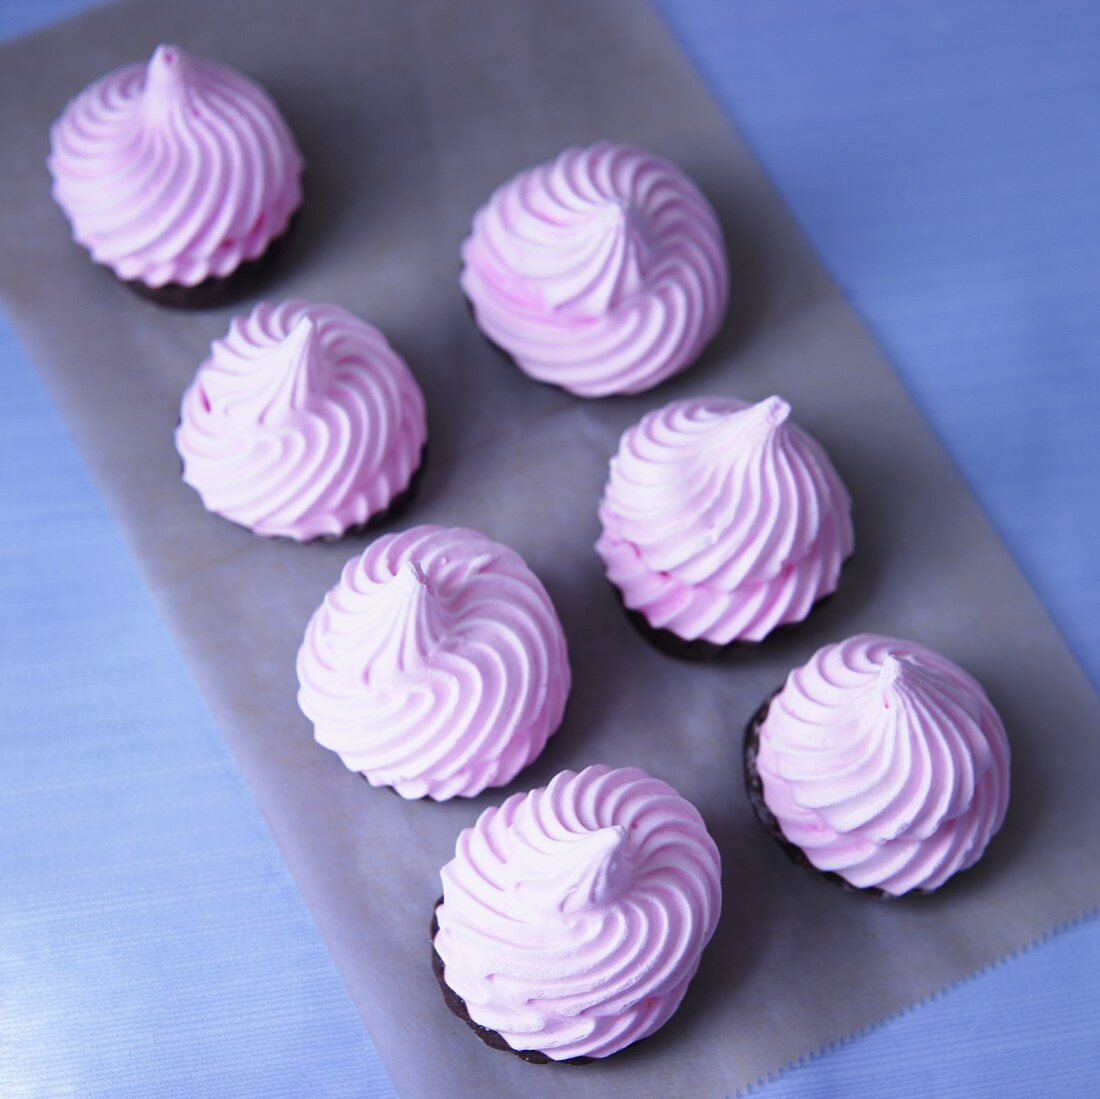 Pink Meringues Dipped in Dark Chocolate; From Above